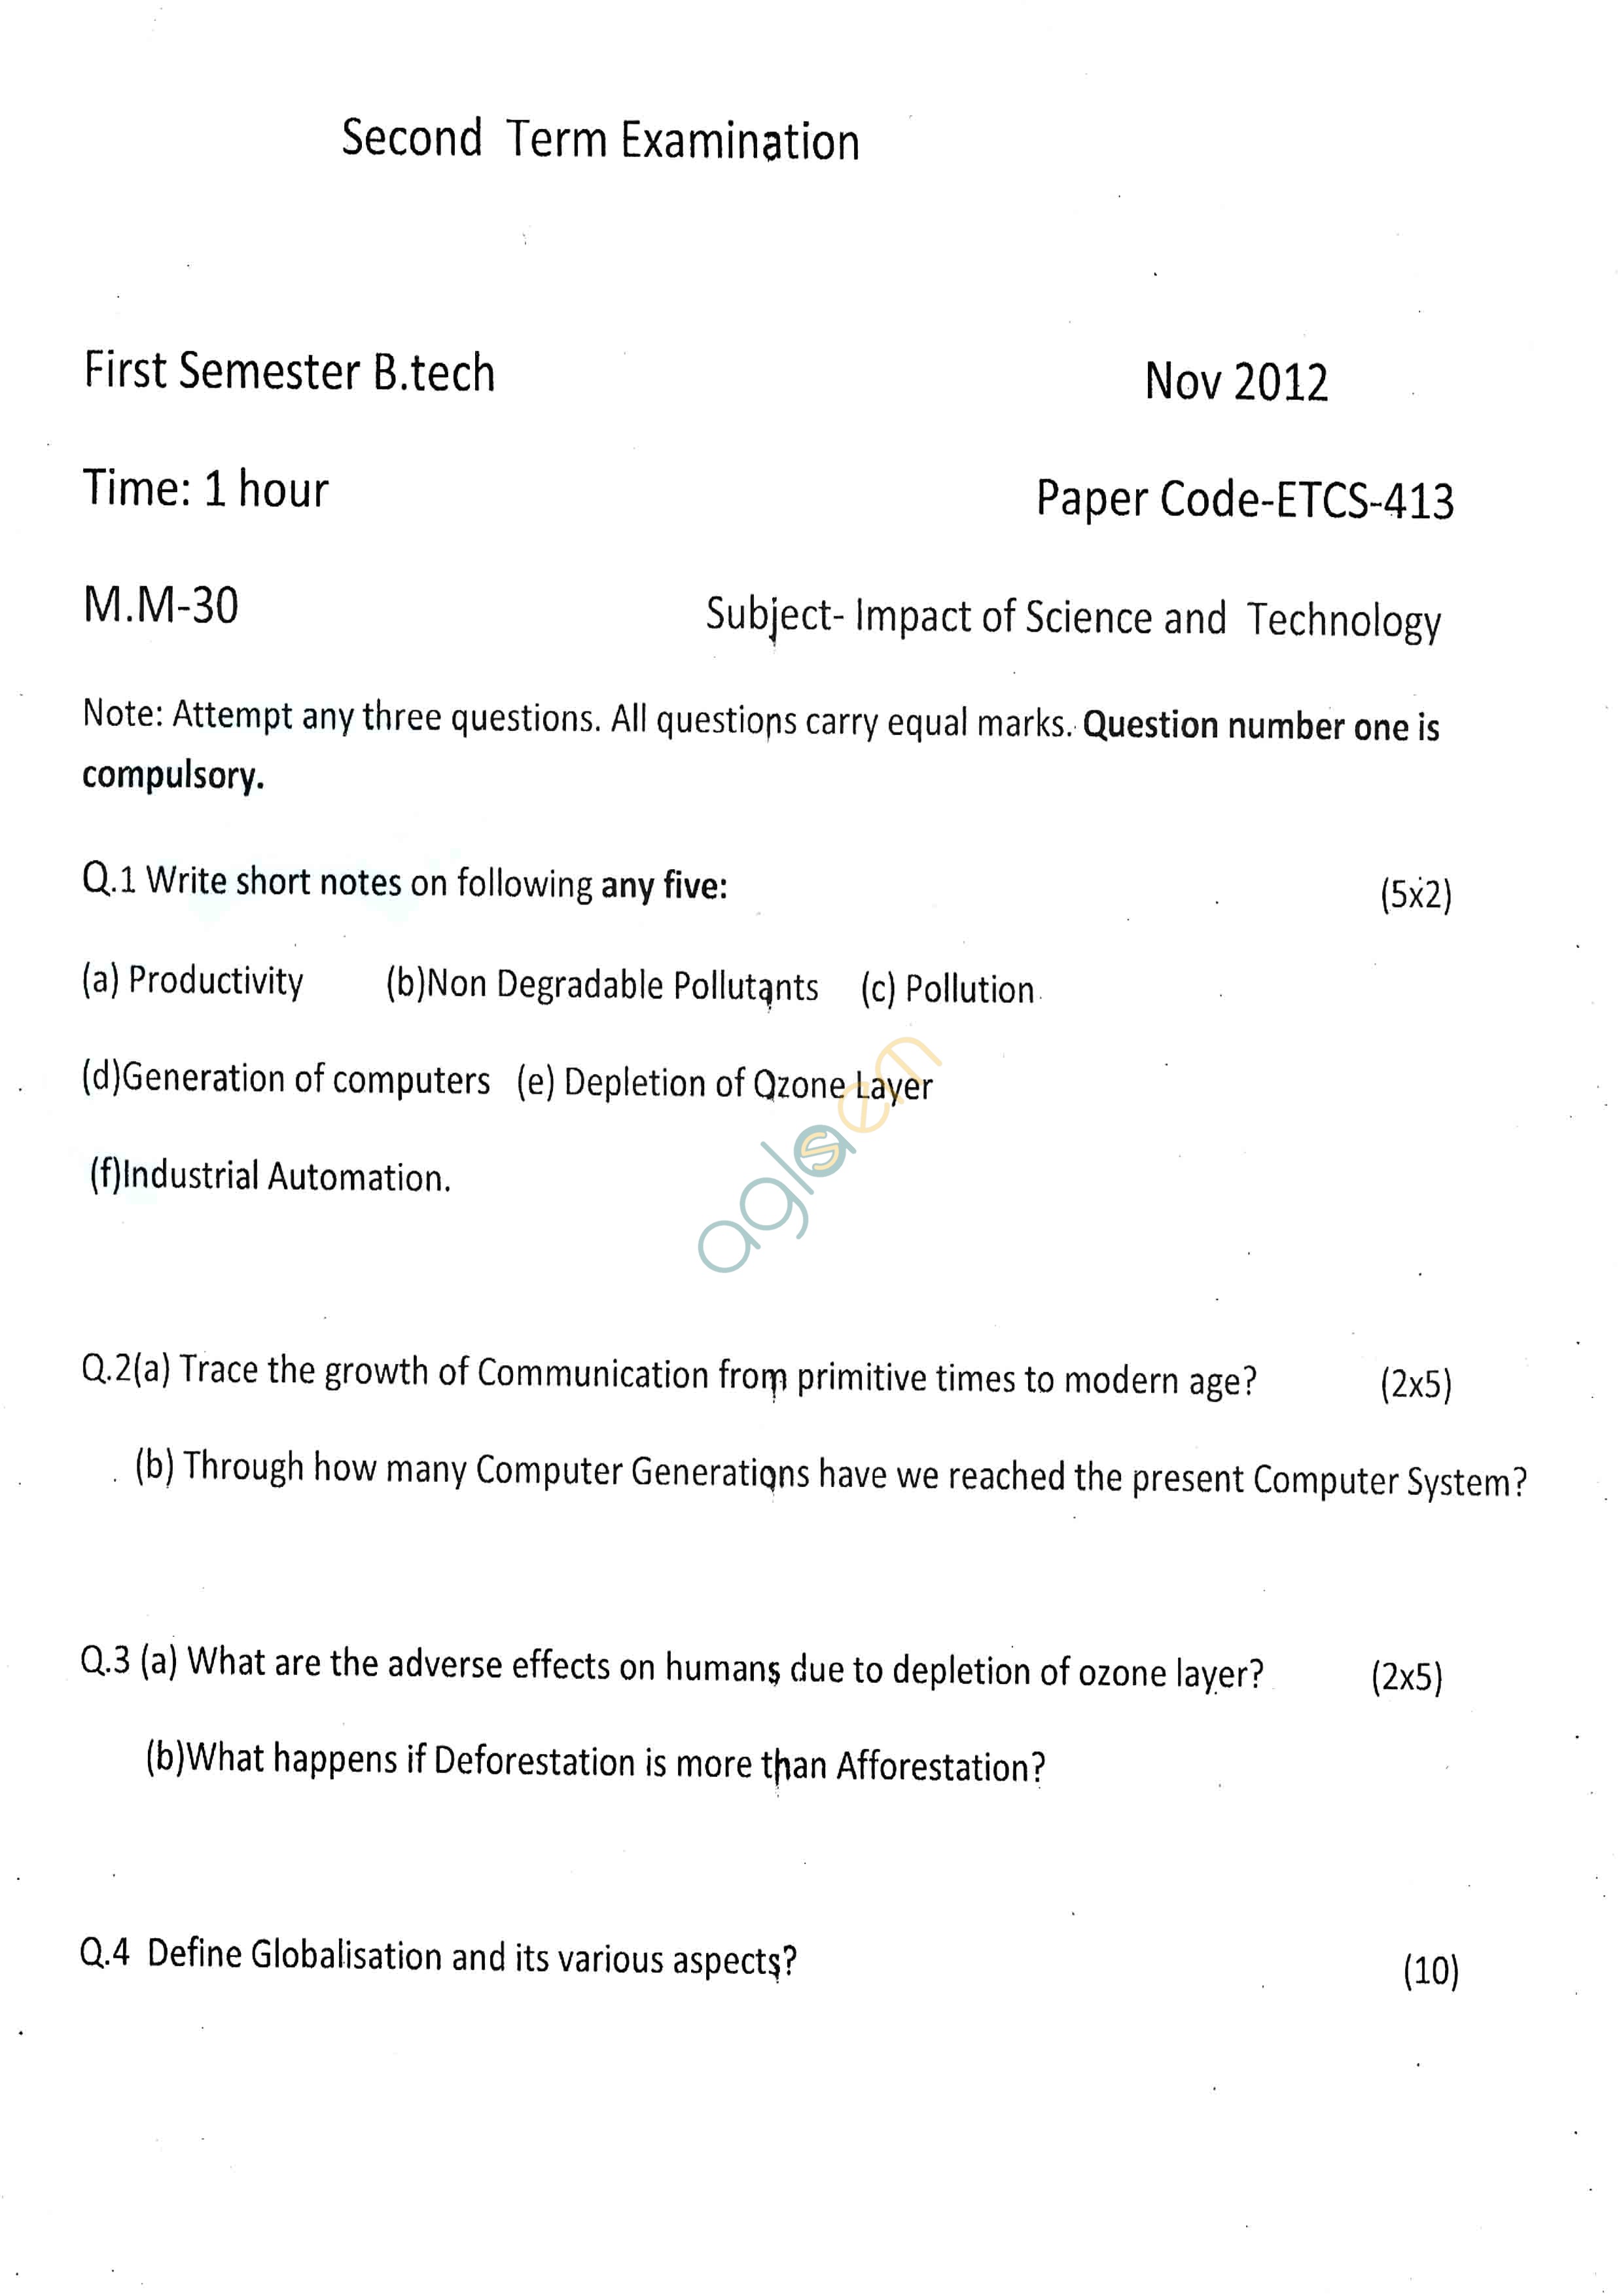 GGSIPU: Question Papers First Semester  Second Term 2012  ETCS-413